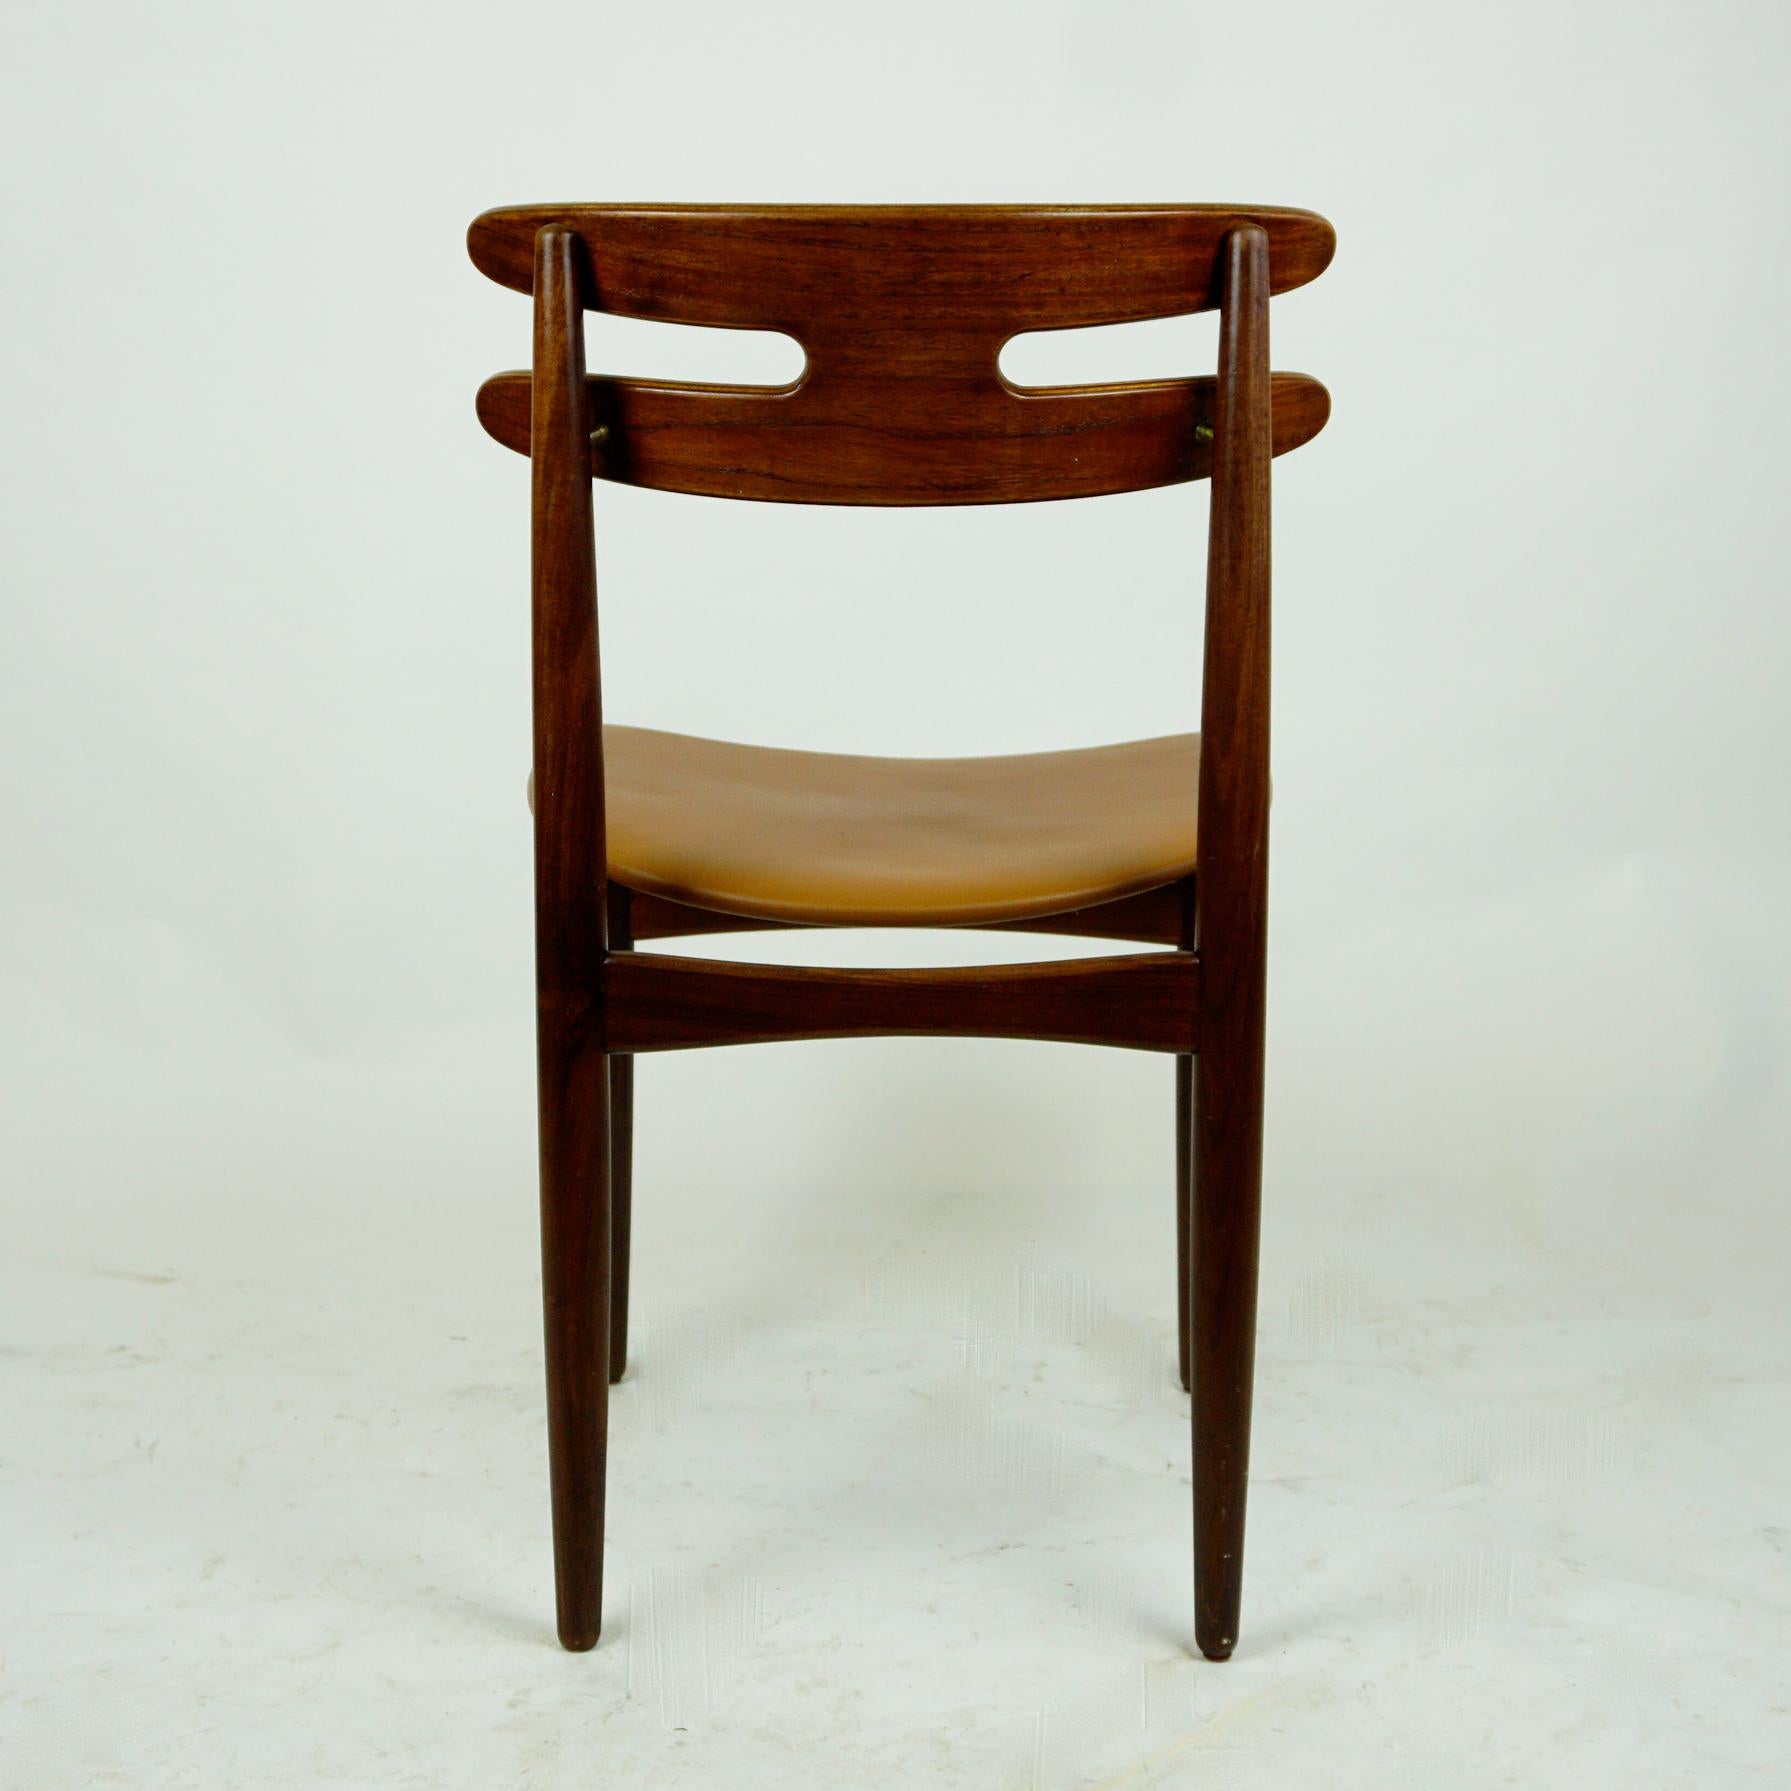 Mid-20th Century Set of Four Danish Teak Dining Chairs Mod. 178 by Johannes Andersen for Bramin